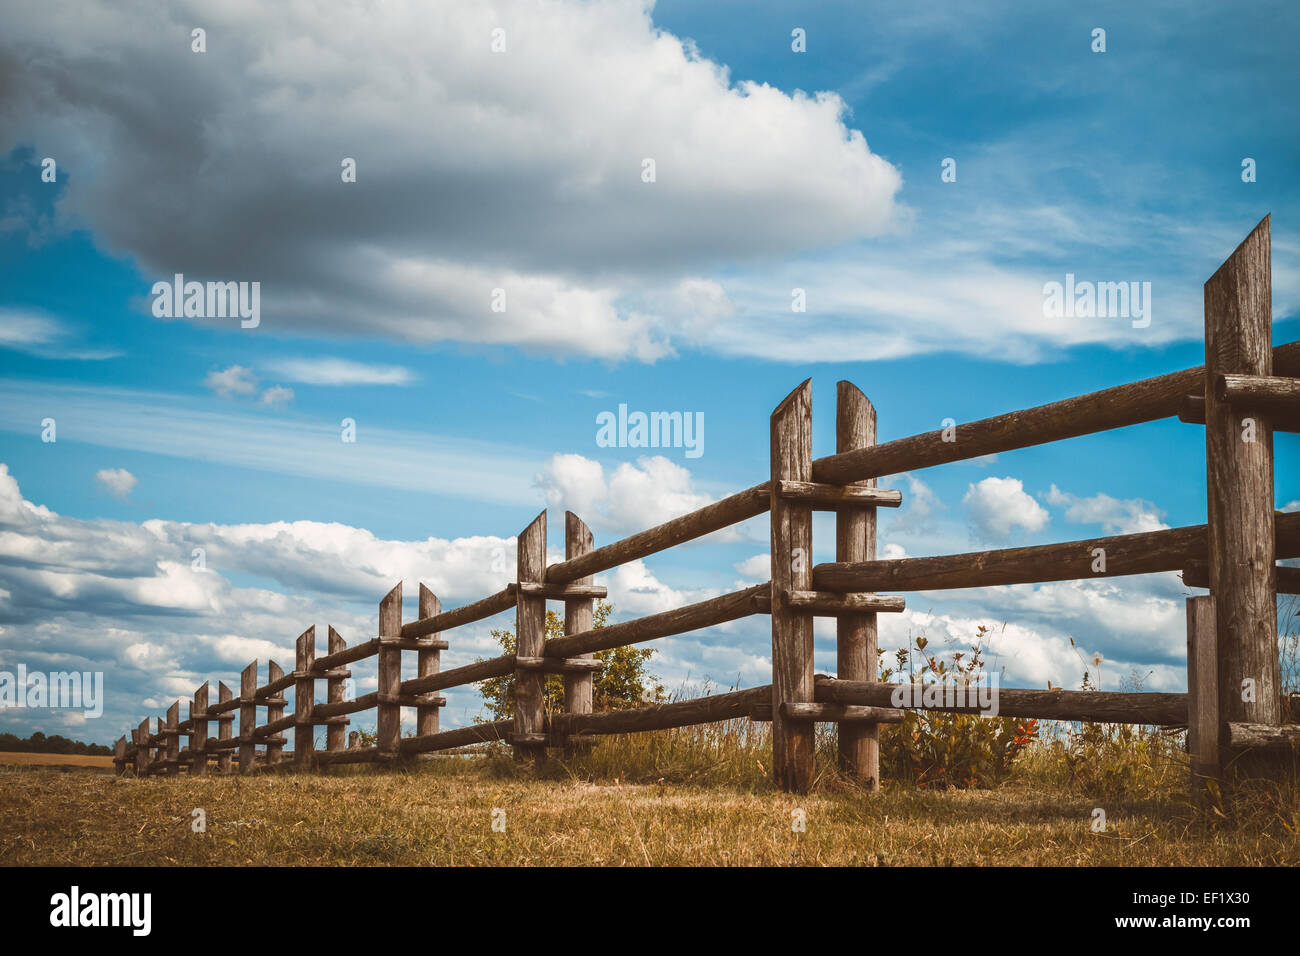 wooden rustic fence in village and blue sky with clouds Stock Photo